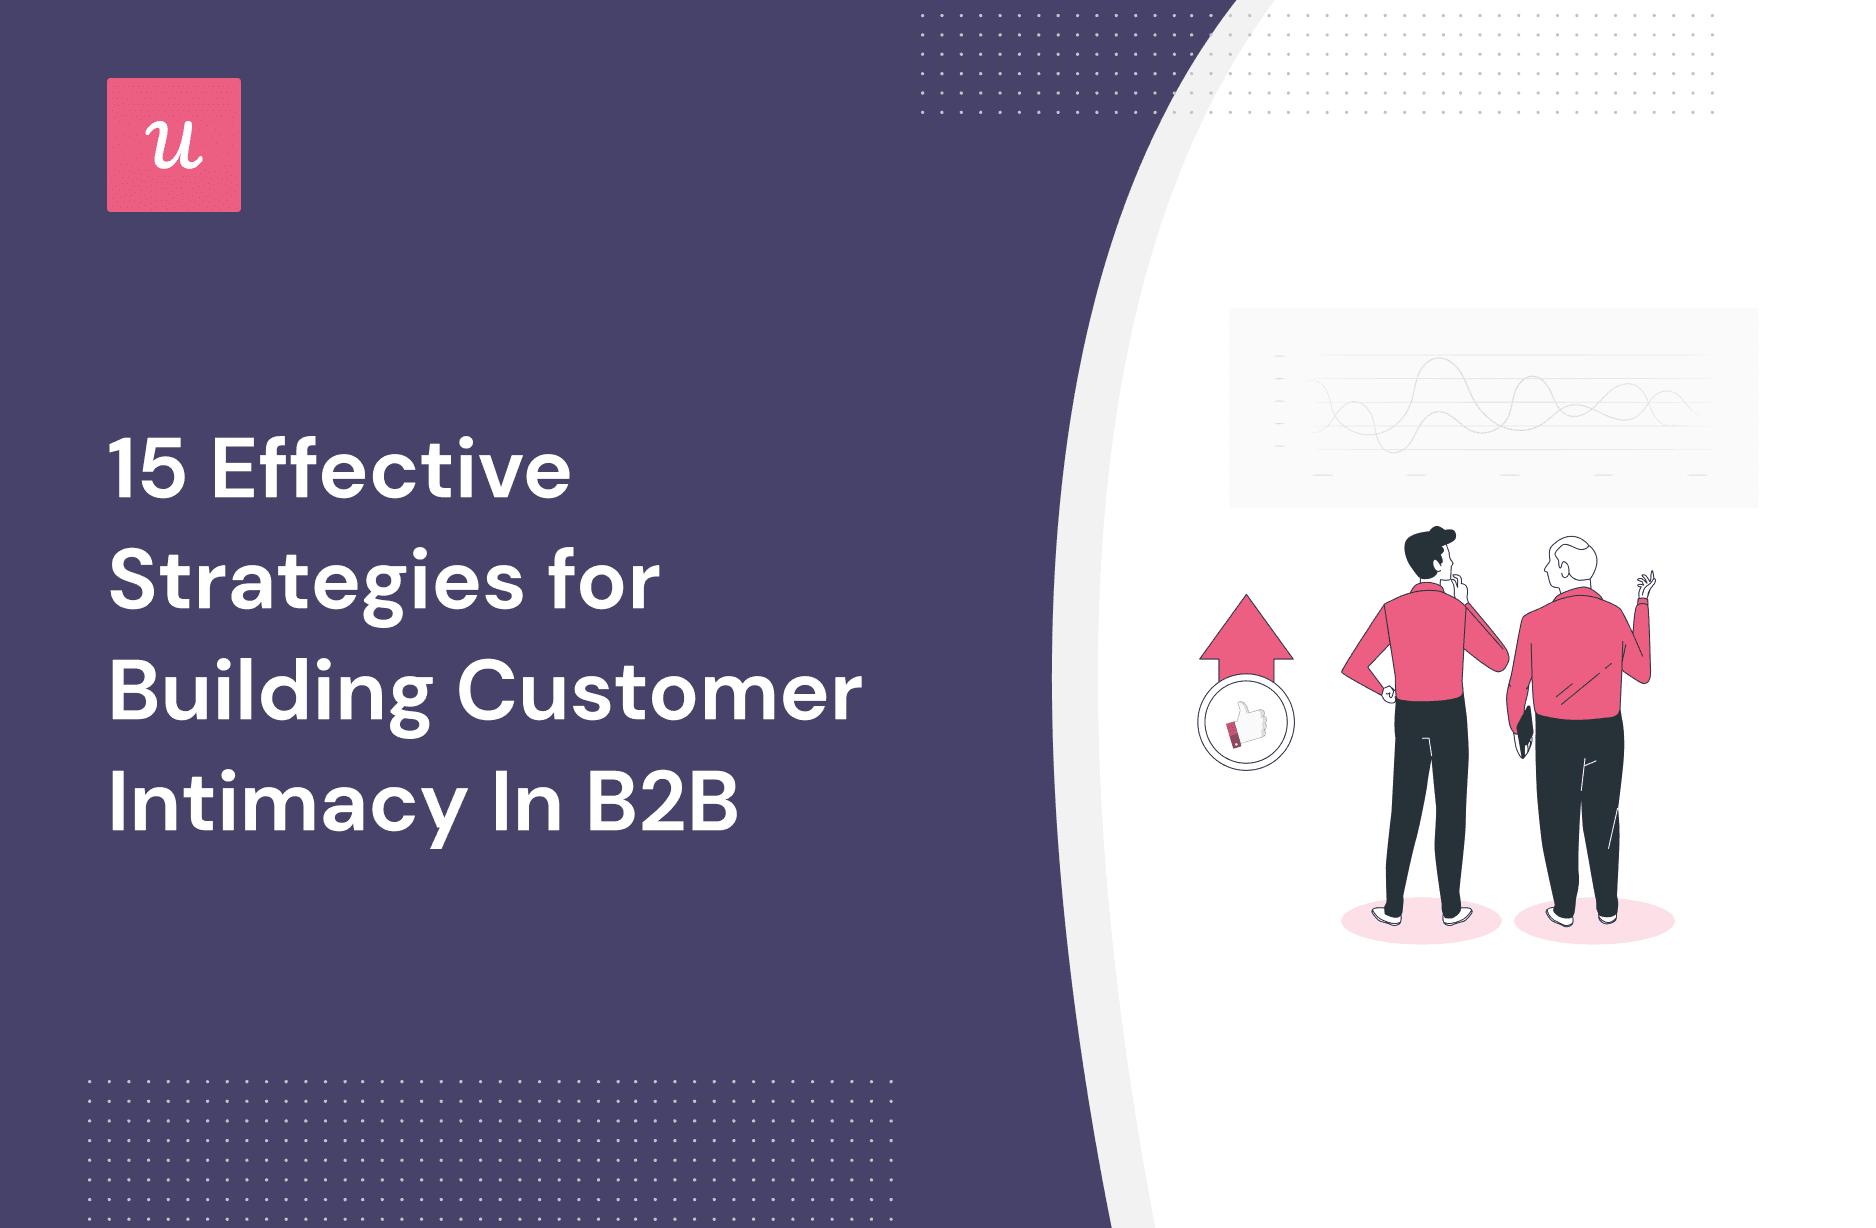 15 Customer Intimacy Best Practices and Tips For B2B Companies cover